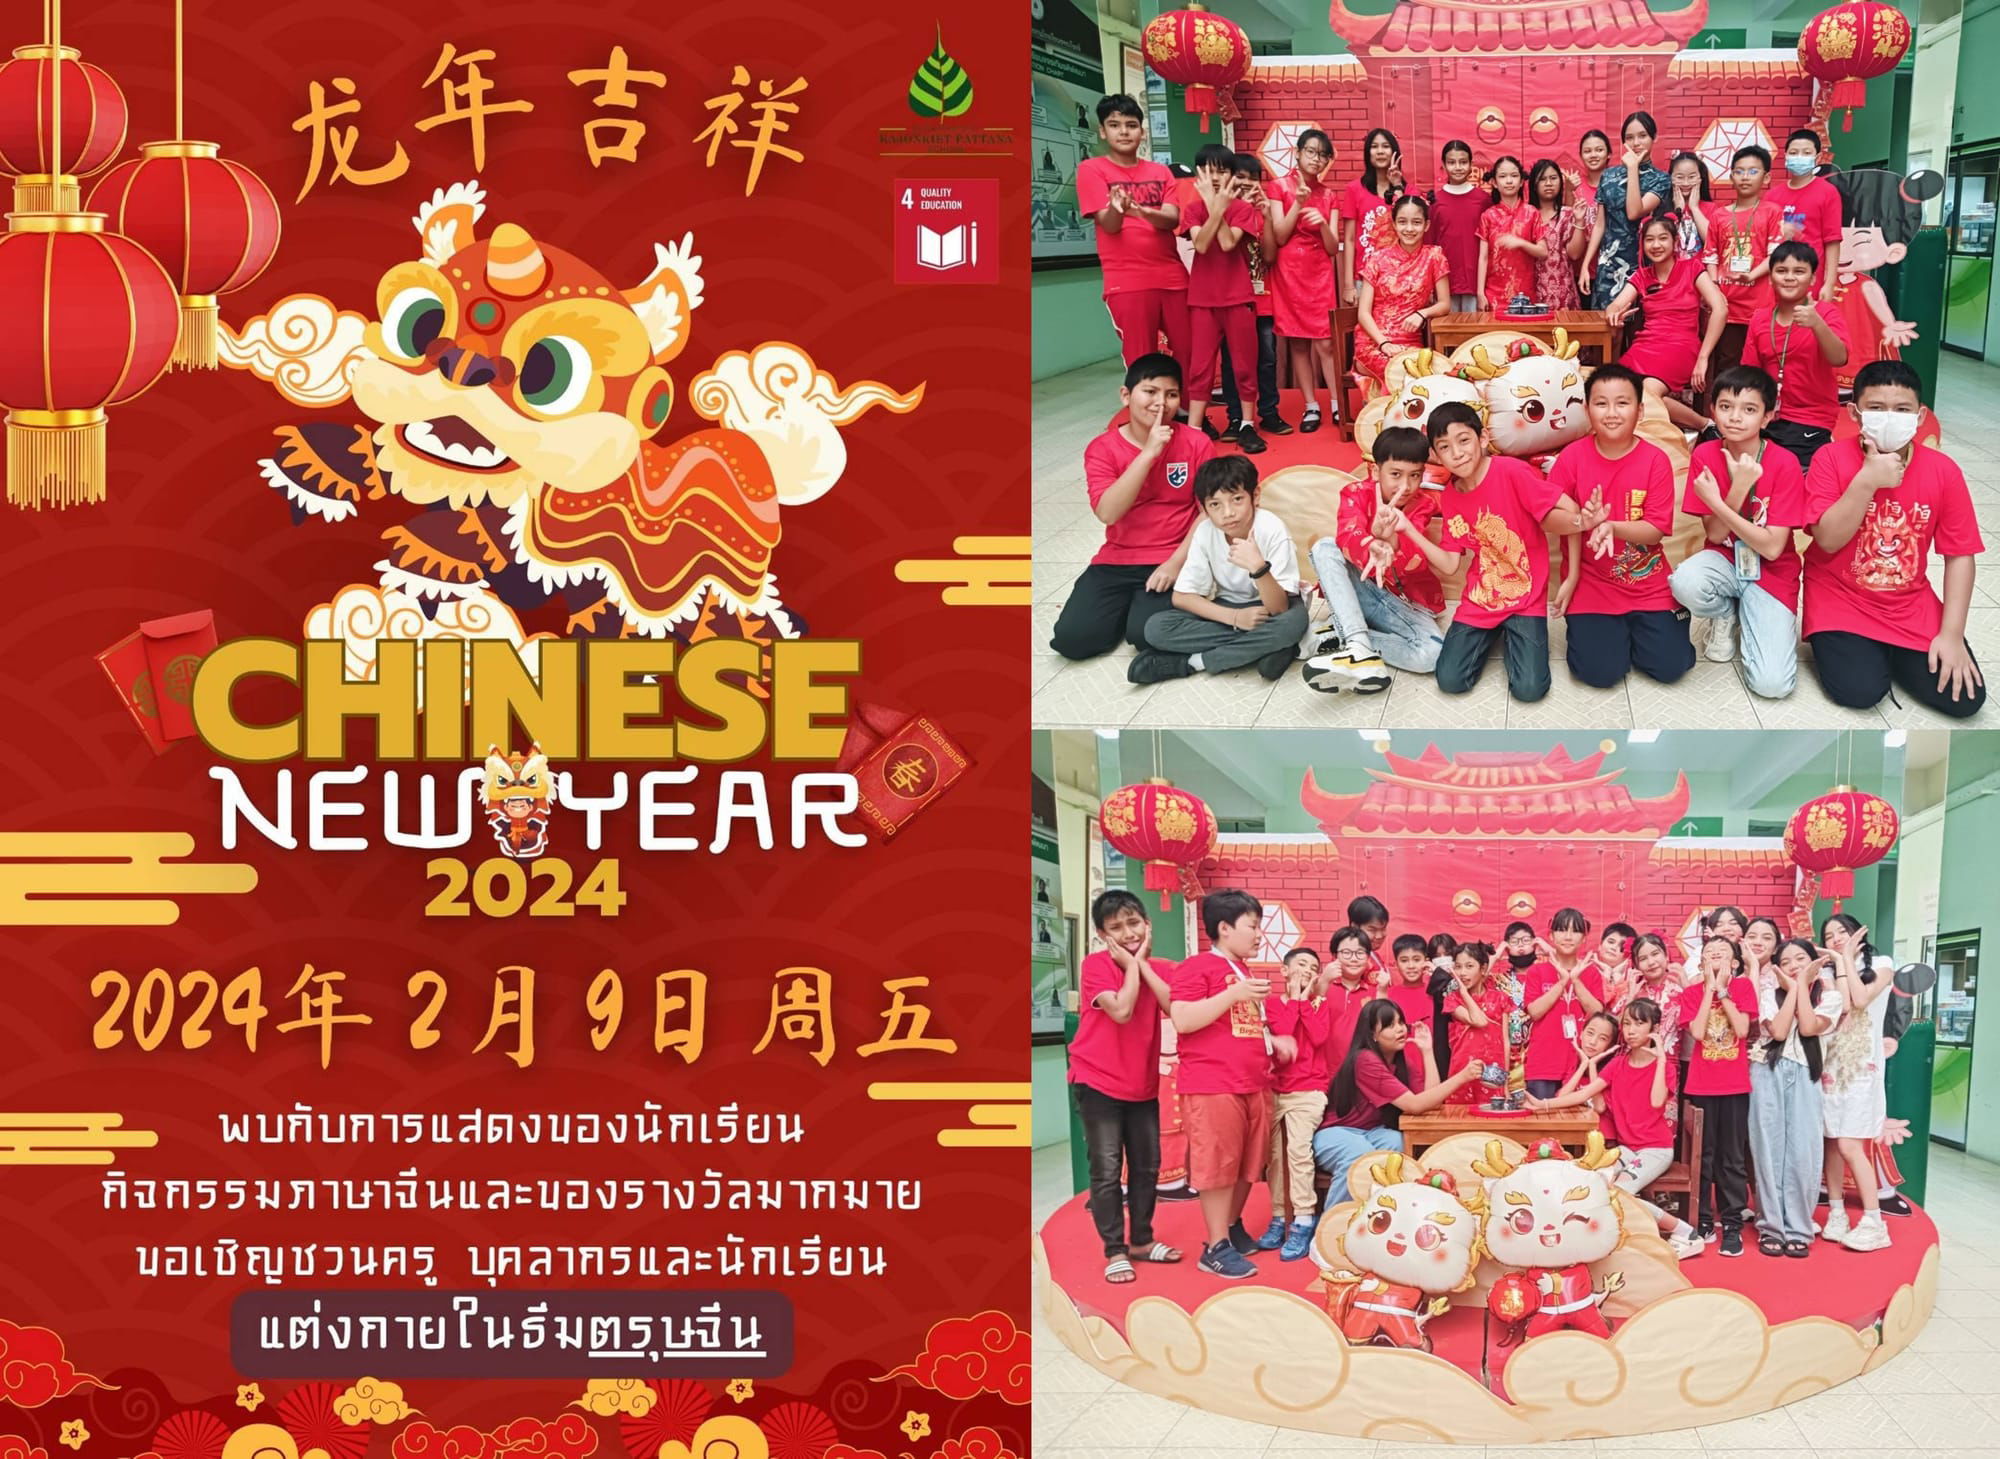 Chinese New Year 2024, 9th February